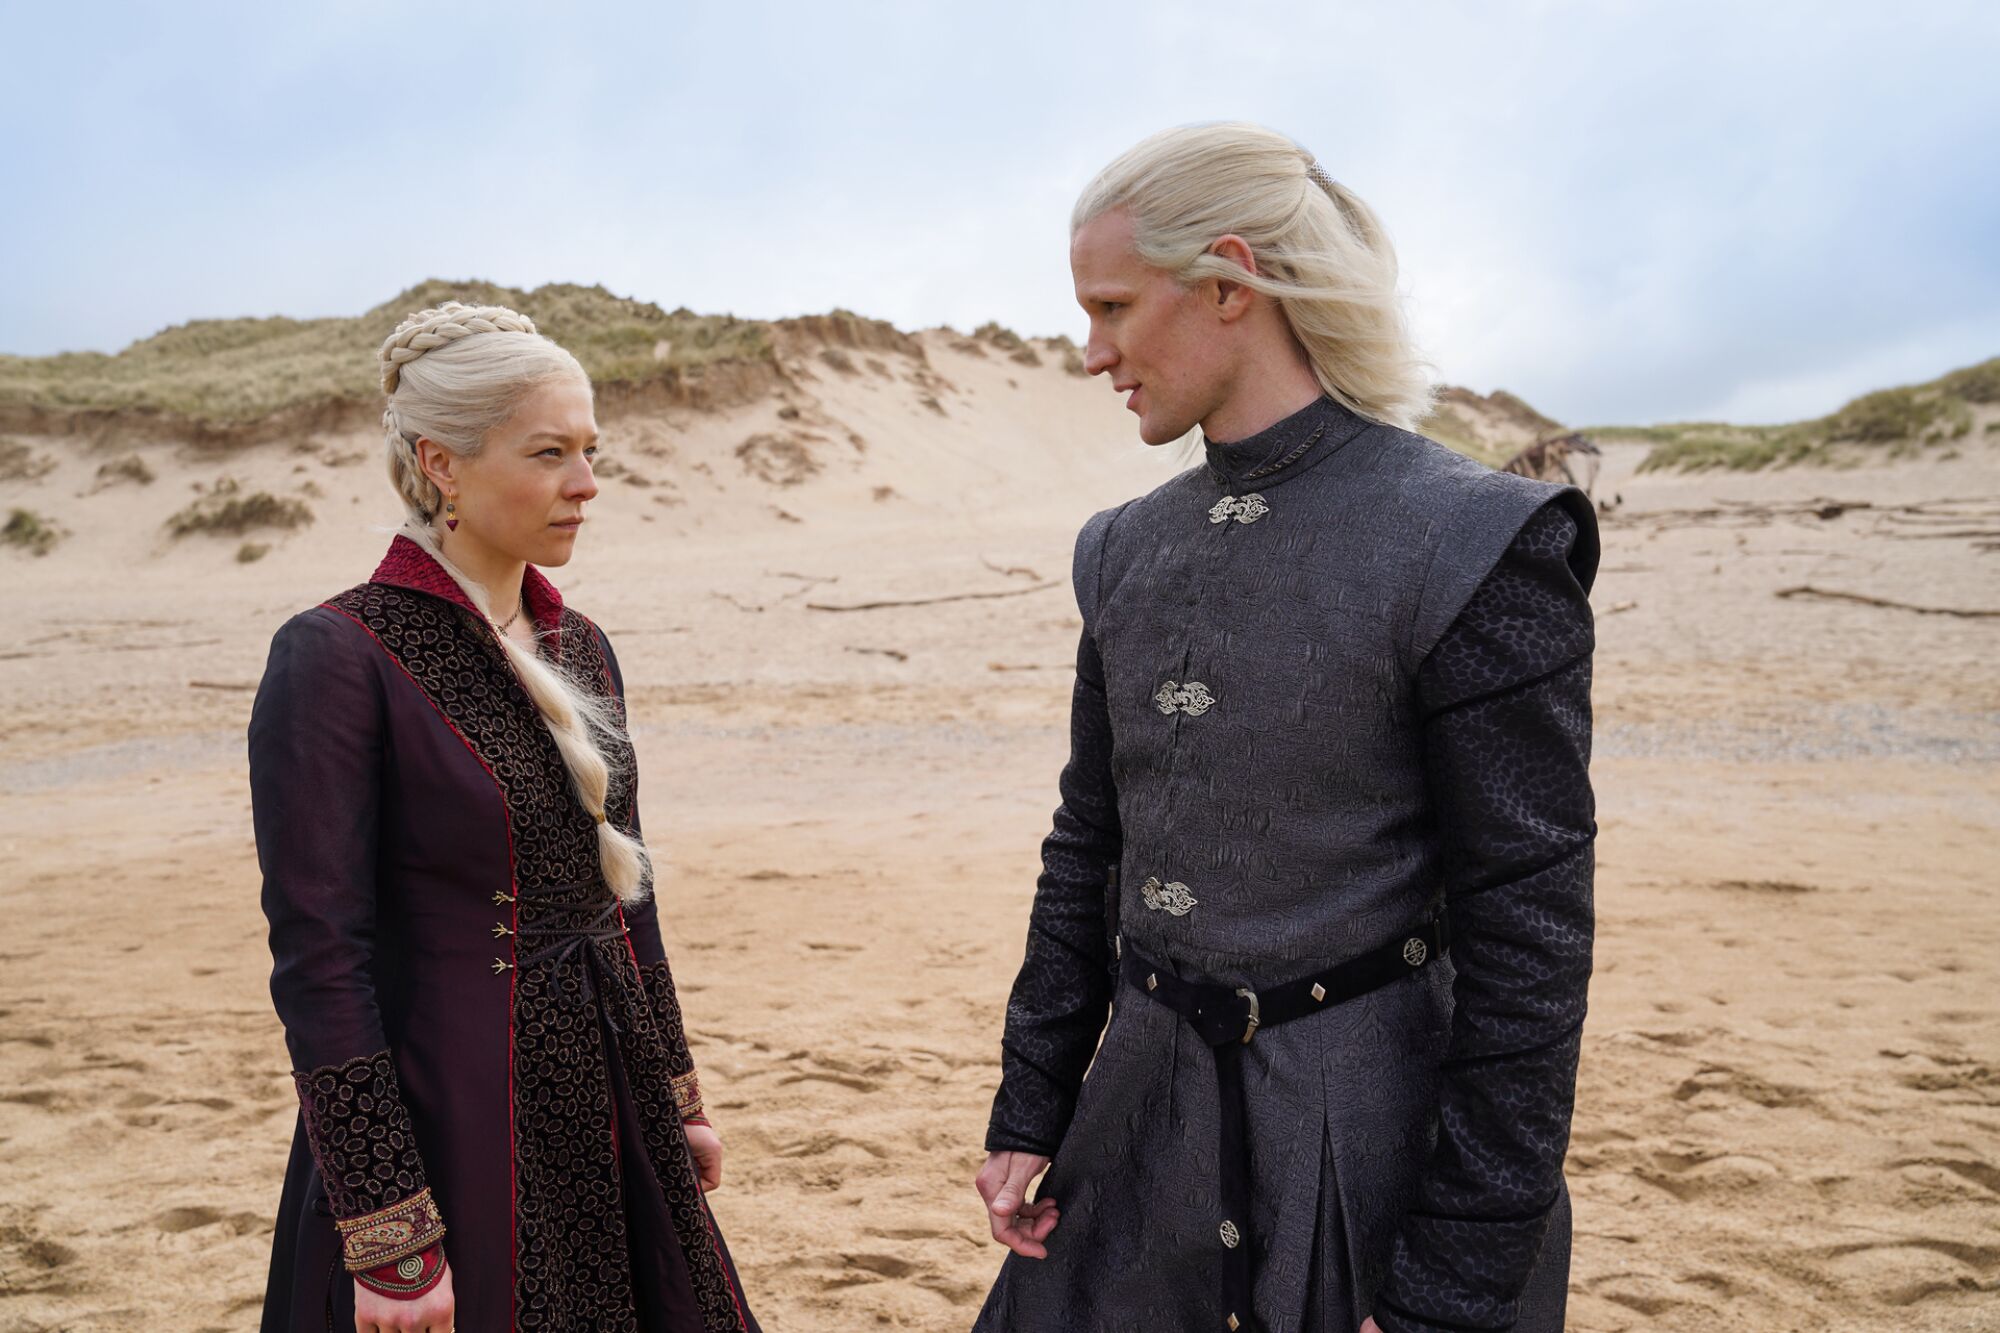 A man and a woman with white-blond hair, wearing medieval costumes, stand on a beach looking at each other.